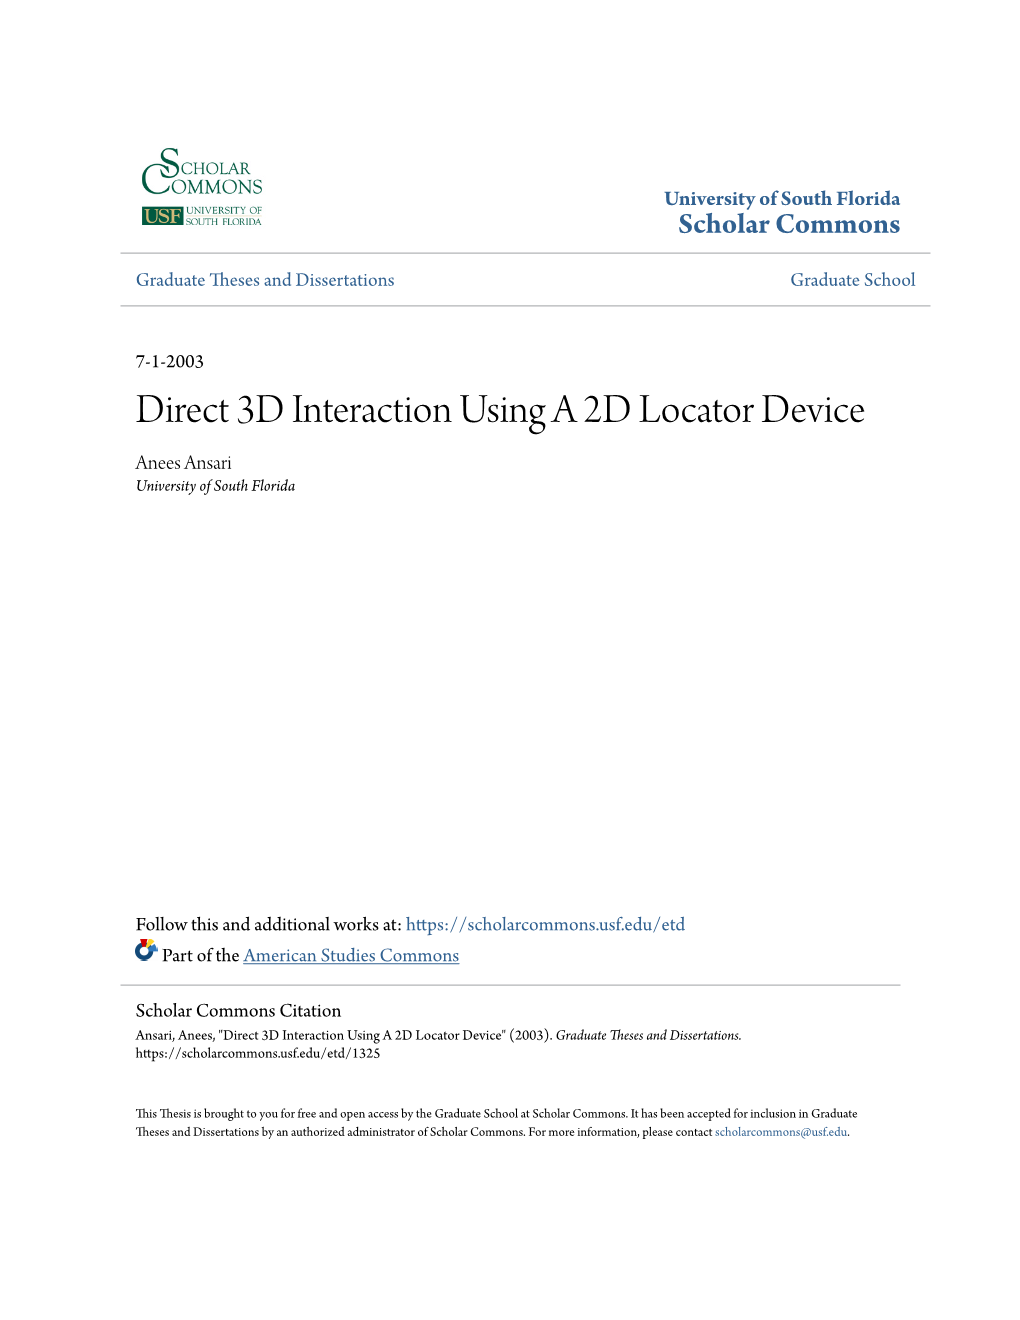 Direct 3D Interaction Using a 2D Locator Device Anees Ansari University of South Florida